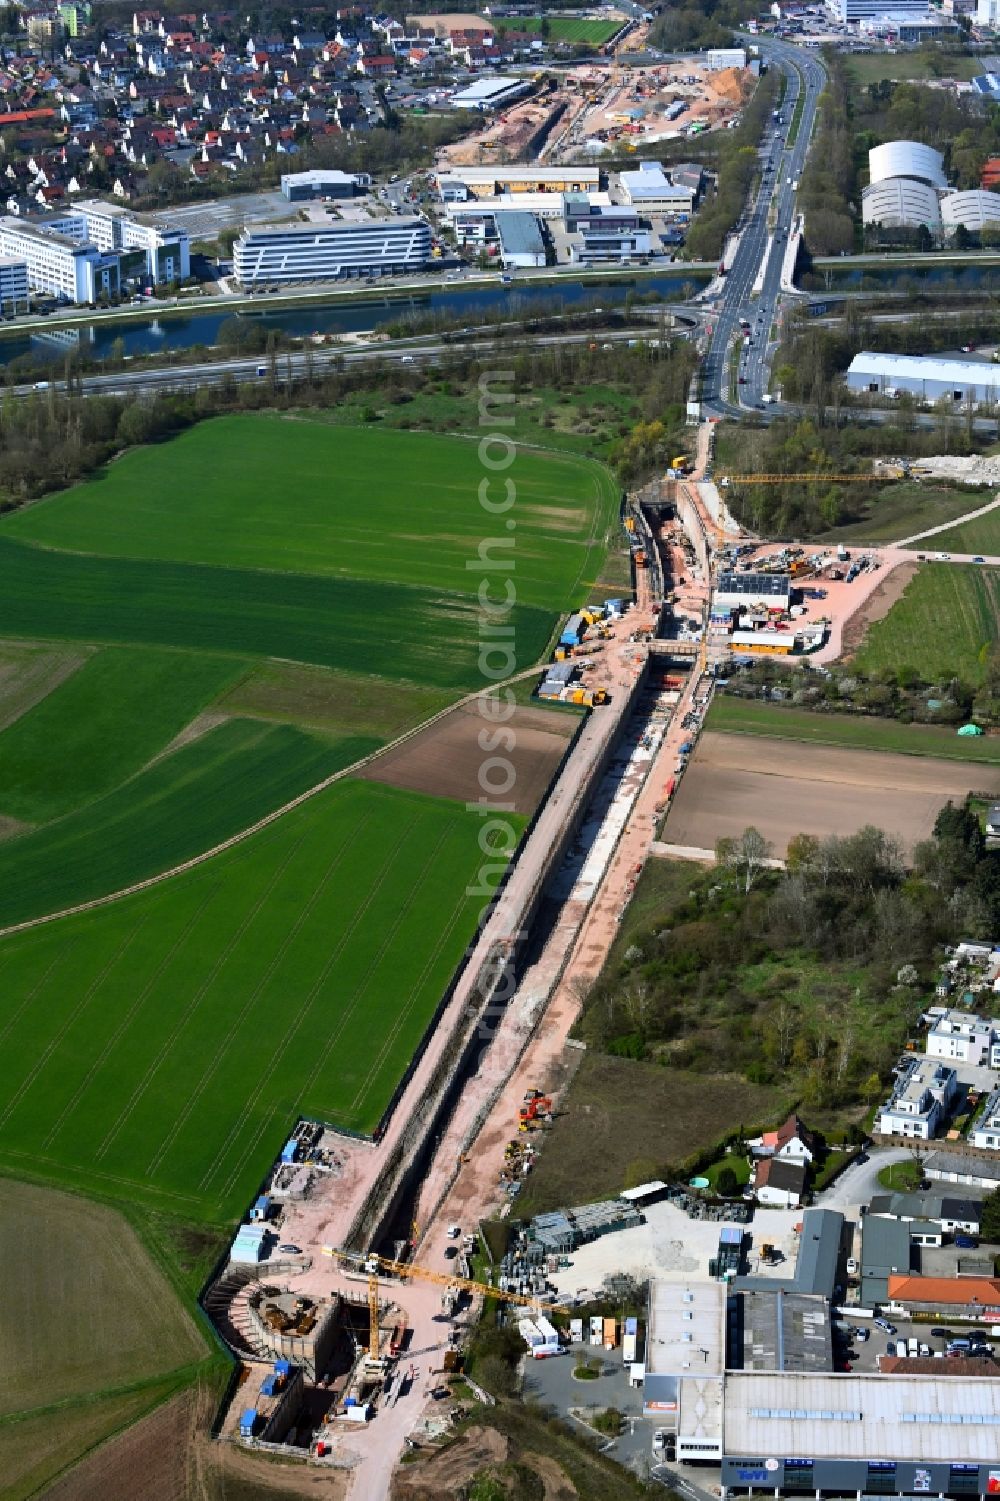 Aerial image Nürnberg - Construction site for new train- tunnel construction of the andergroand metro line in the district Hoefen in Nuremberg in the state Bavaria, Germany